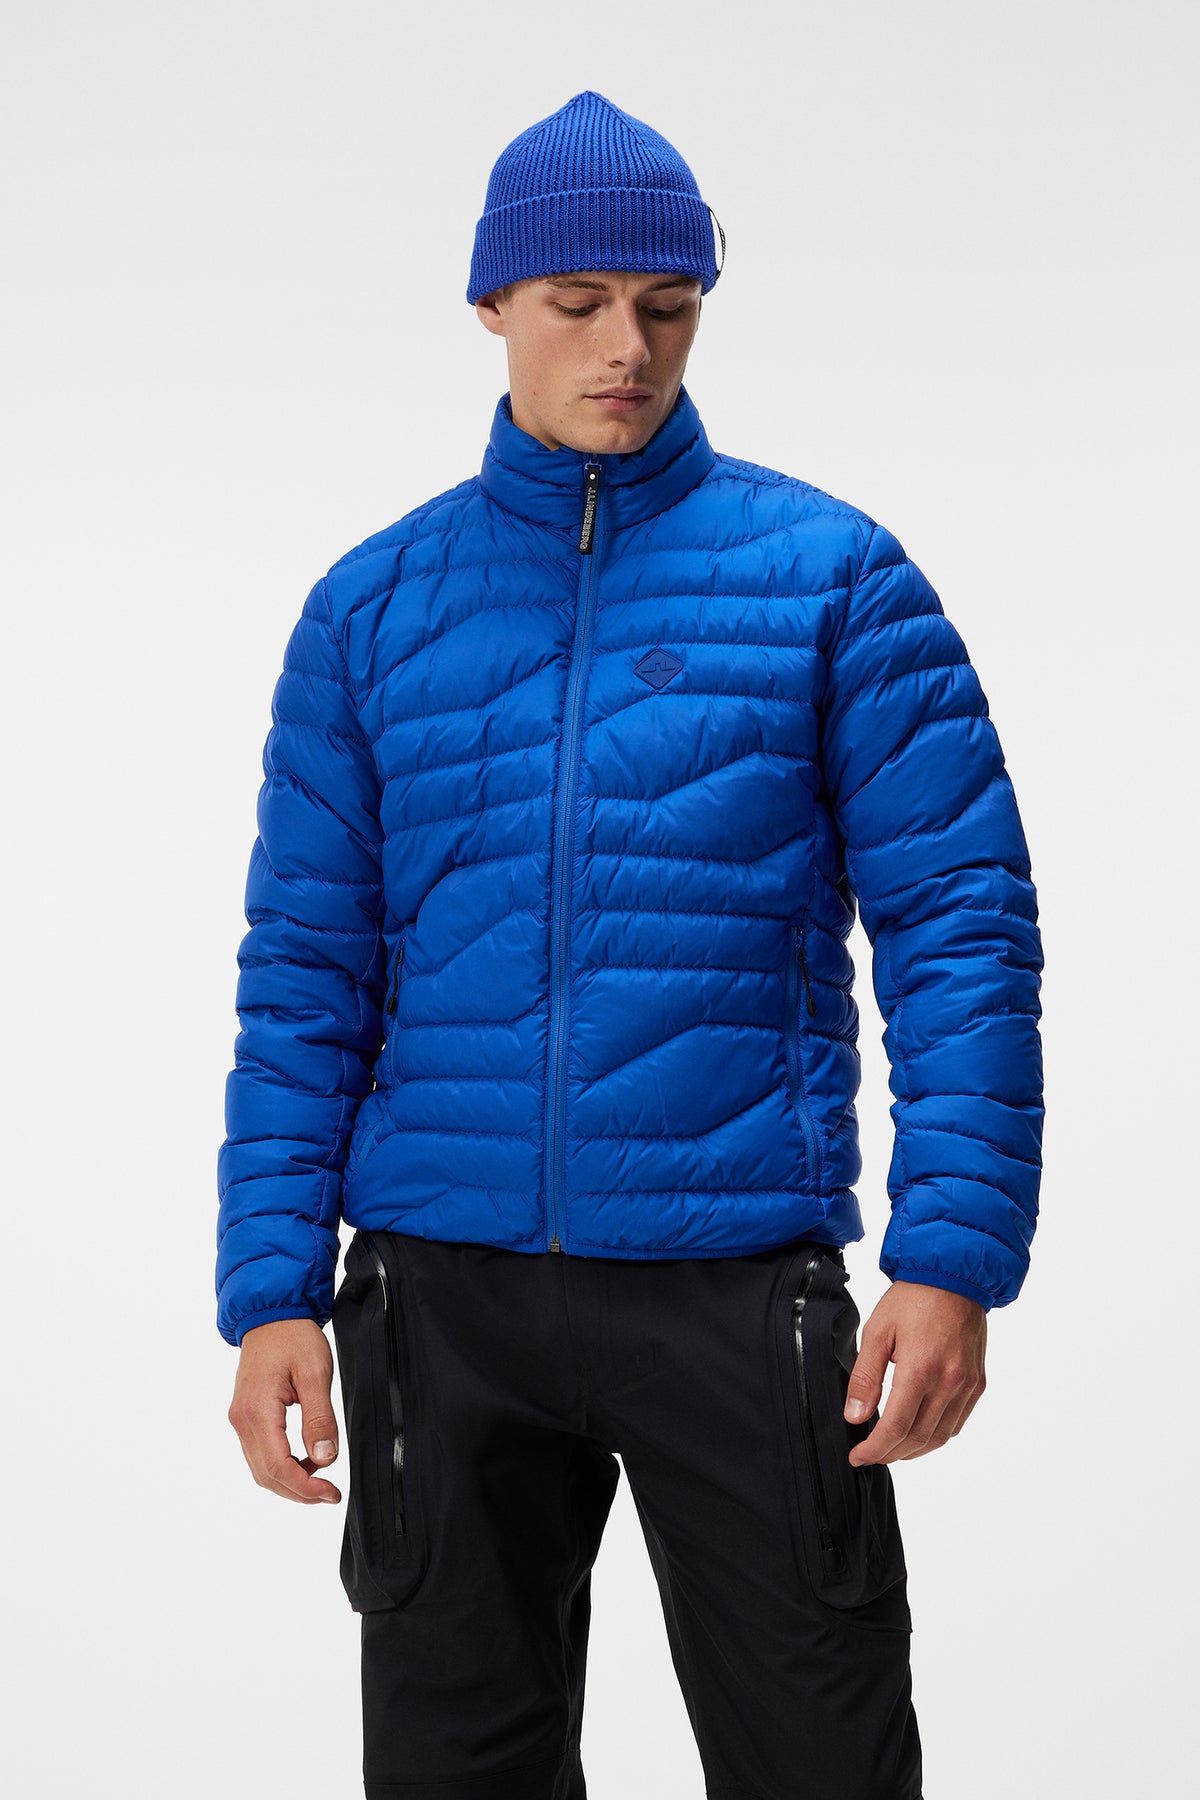 Cliff Light Down Jacket / Surf the Web